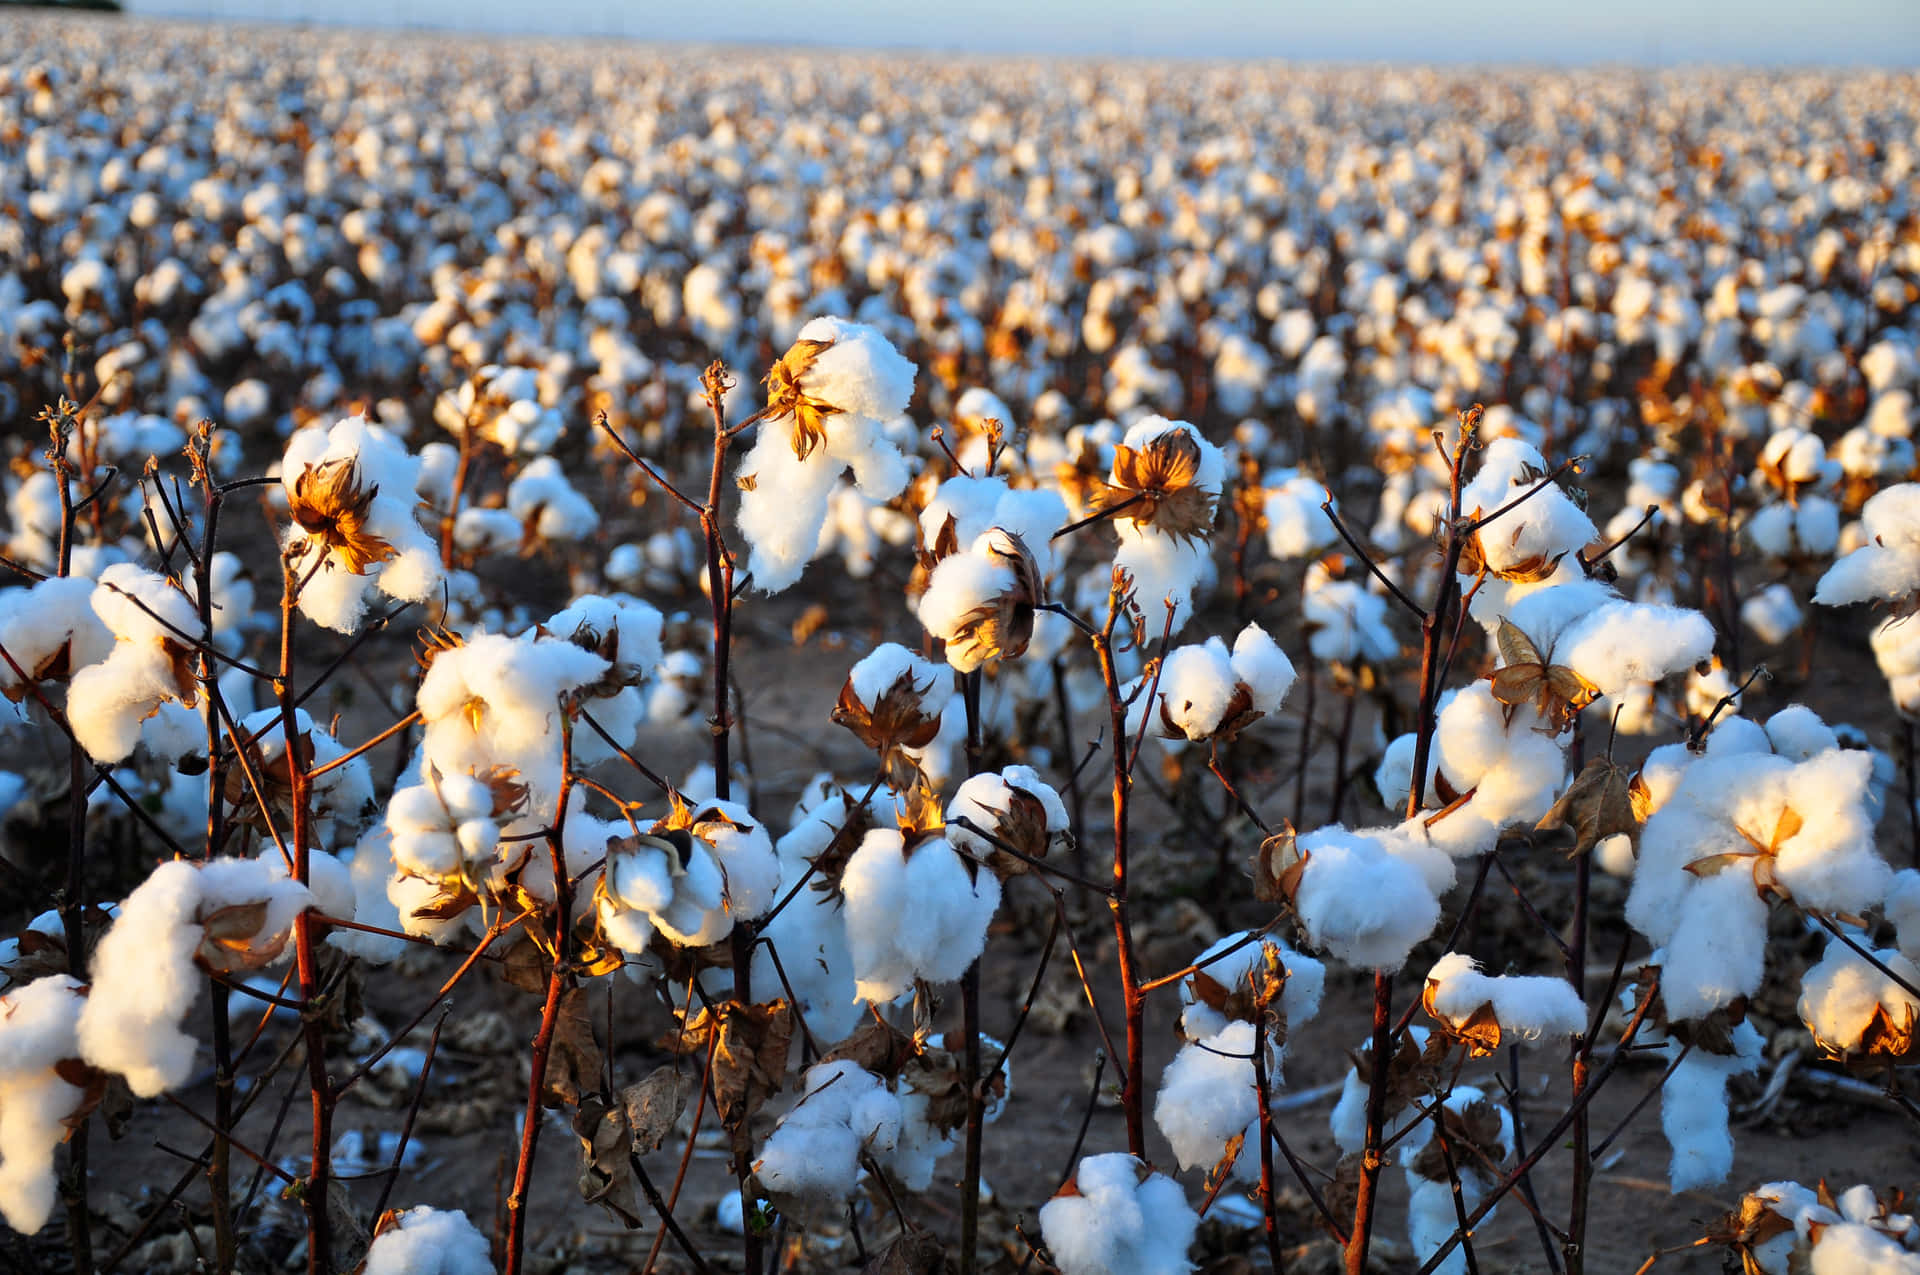 "The Enchanting Beauty of Nature: A Vast Cotton Field"